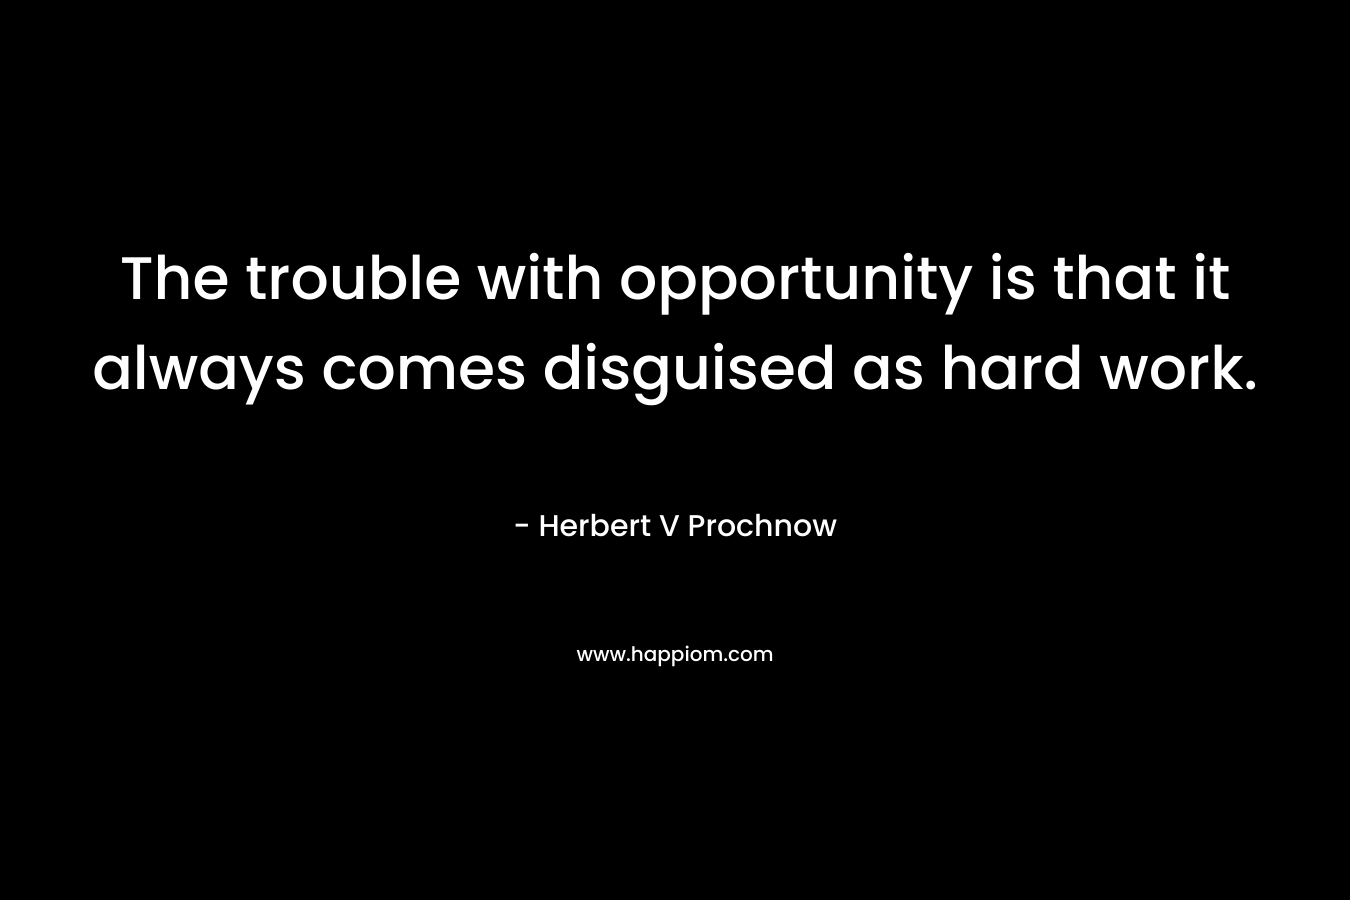 The trouble with opportunity is that it always comes disguised as hard work. – Herbert V Prochnow